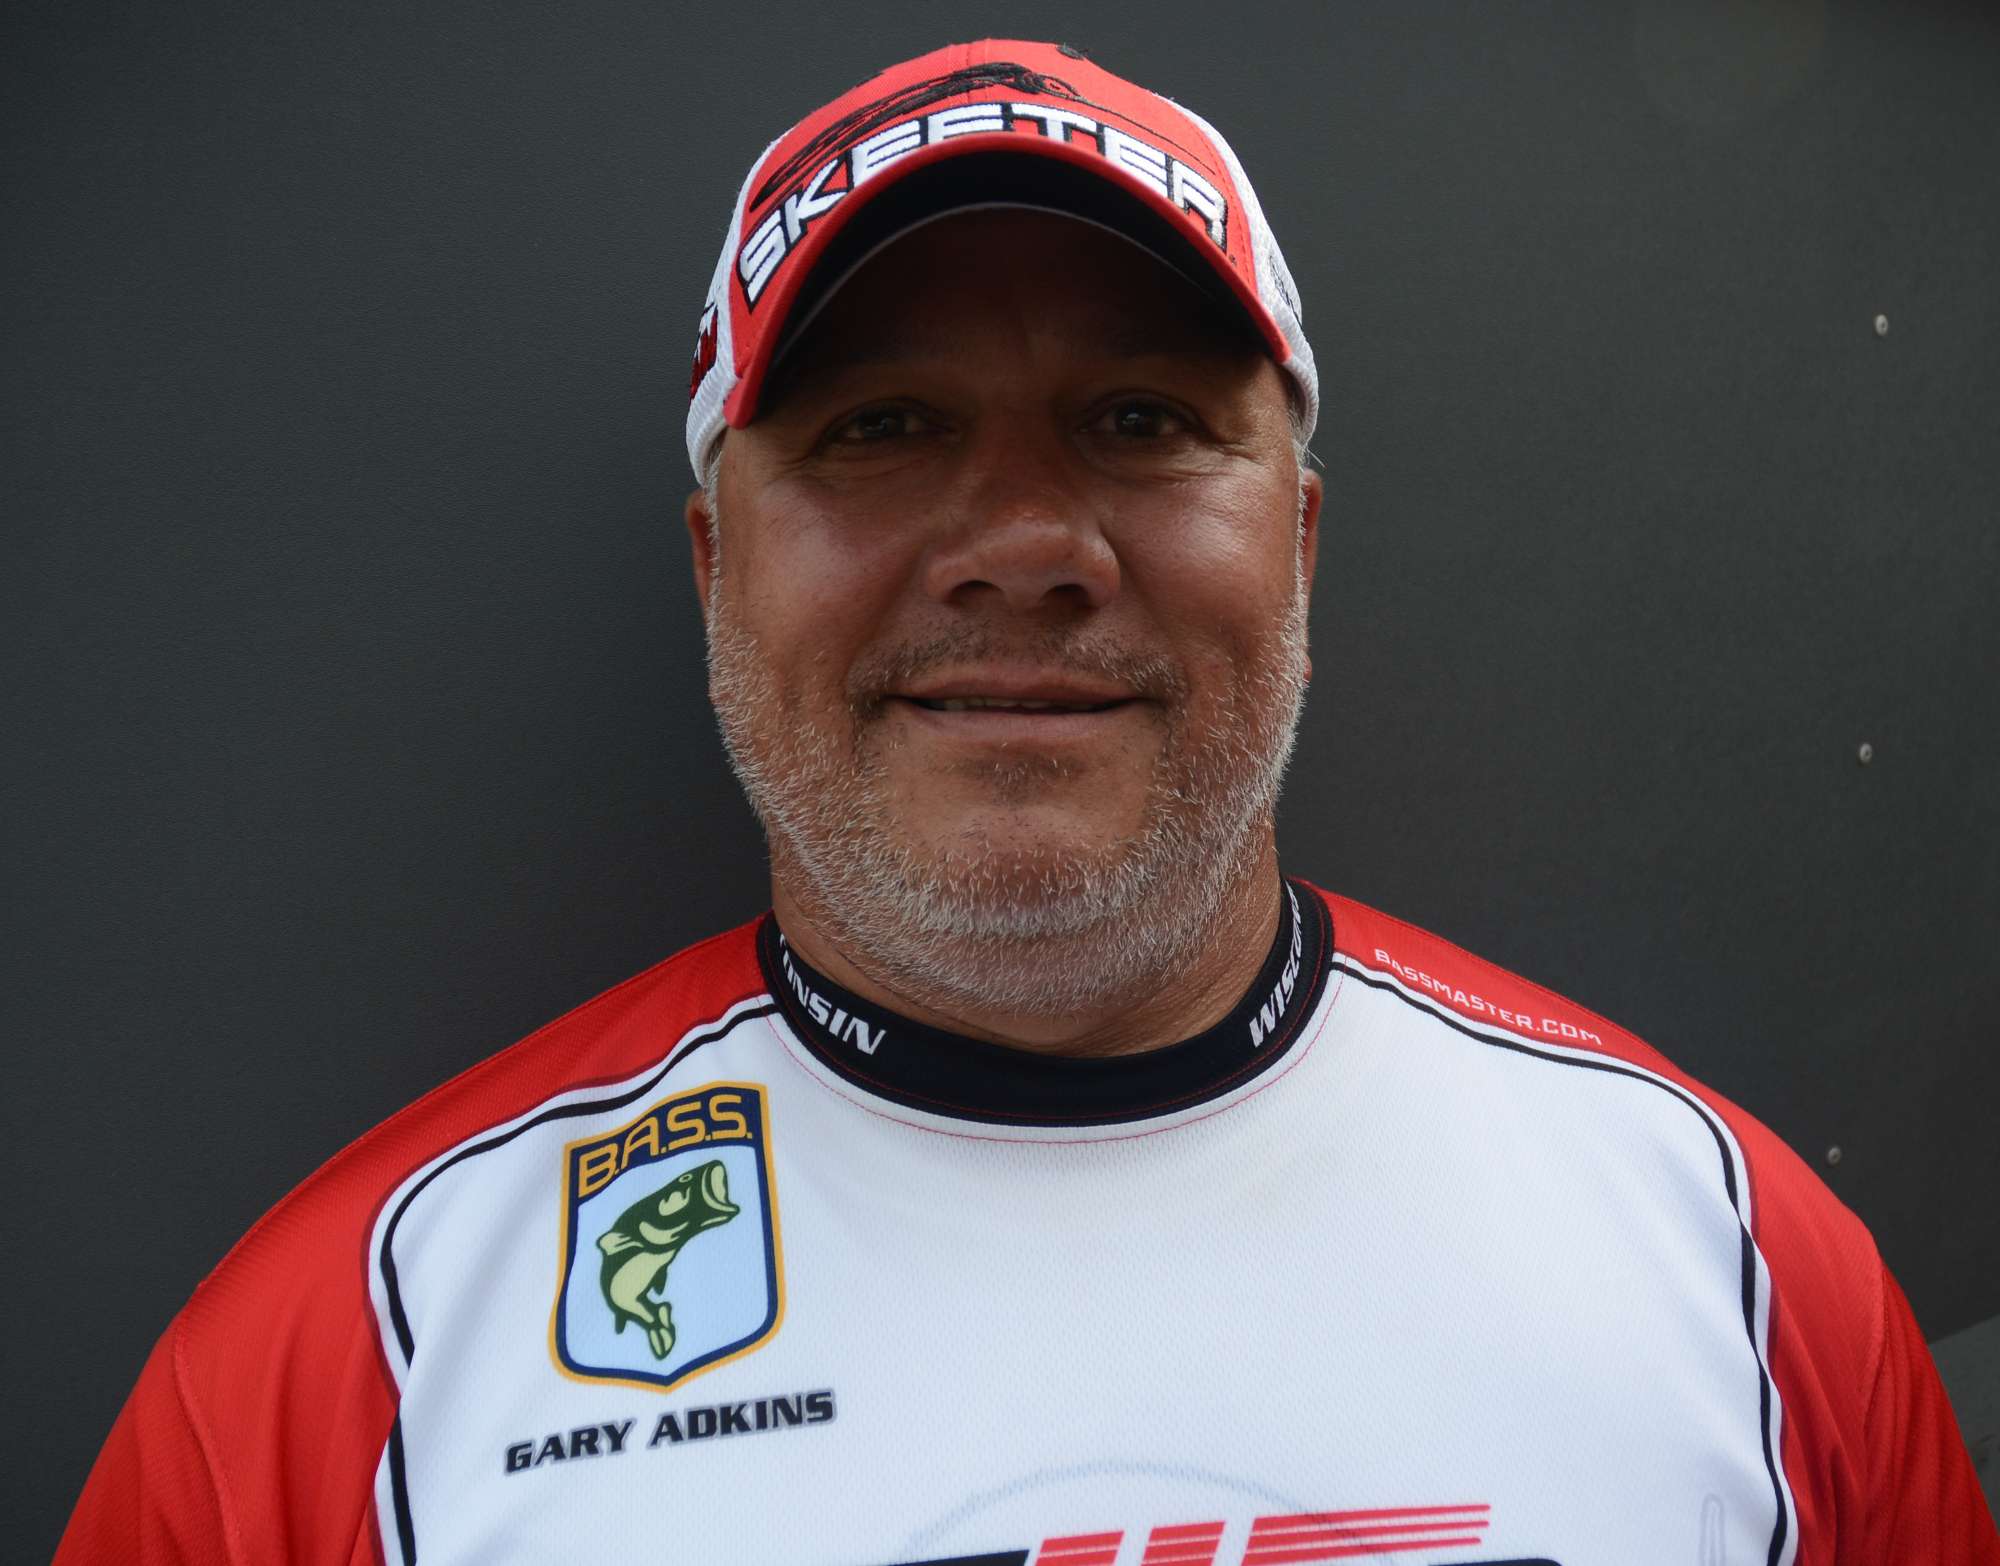 Gary Adkins of Wisconsin is a mill wright superintendent. But for fun, he likes hunting, traveling and watching sports. This will be the first championship for the Great Lakes Bass Anglers member.